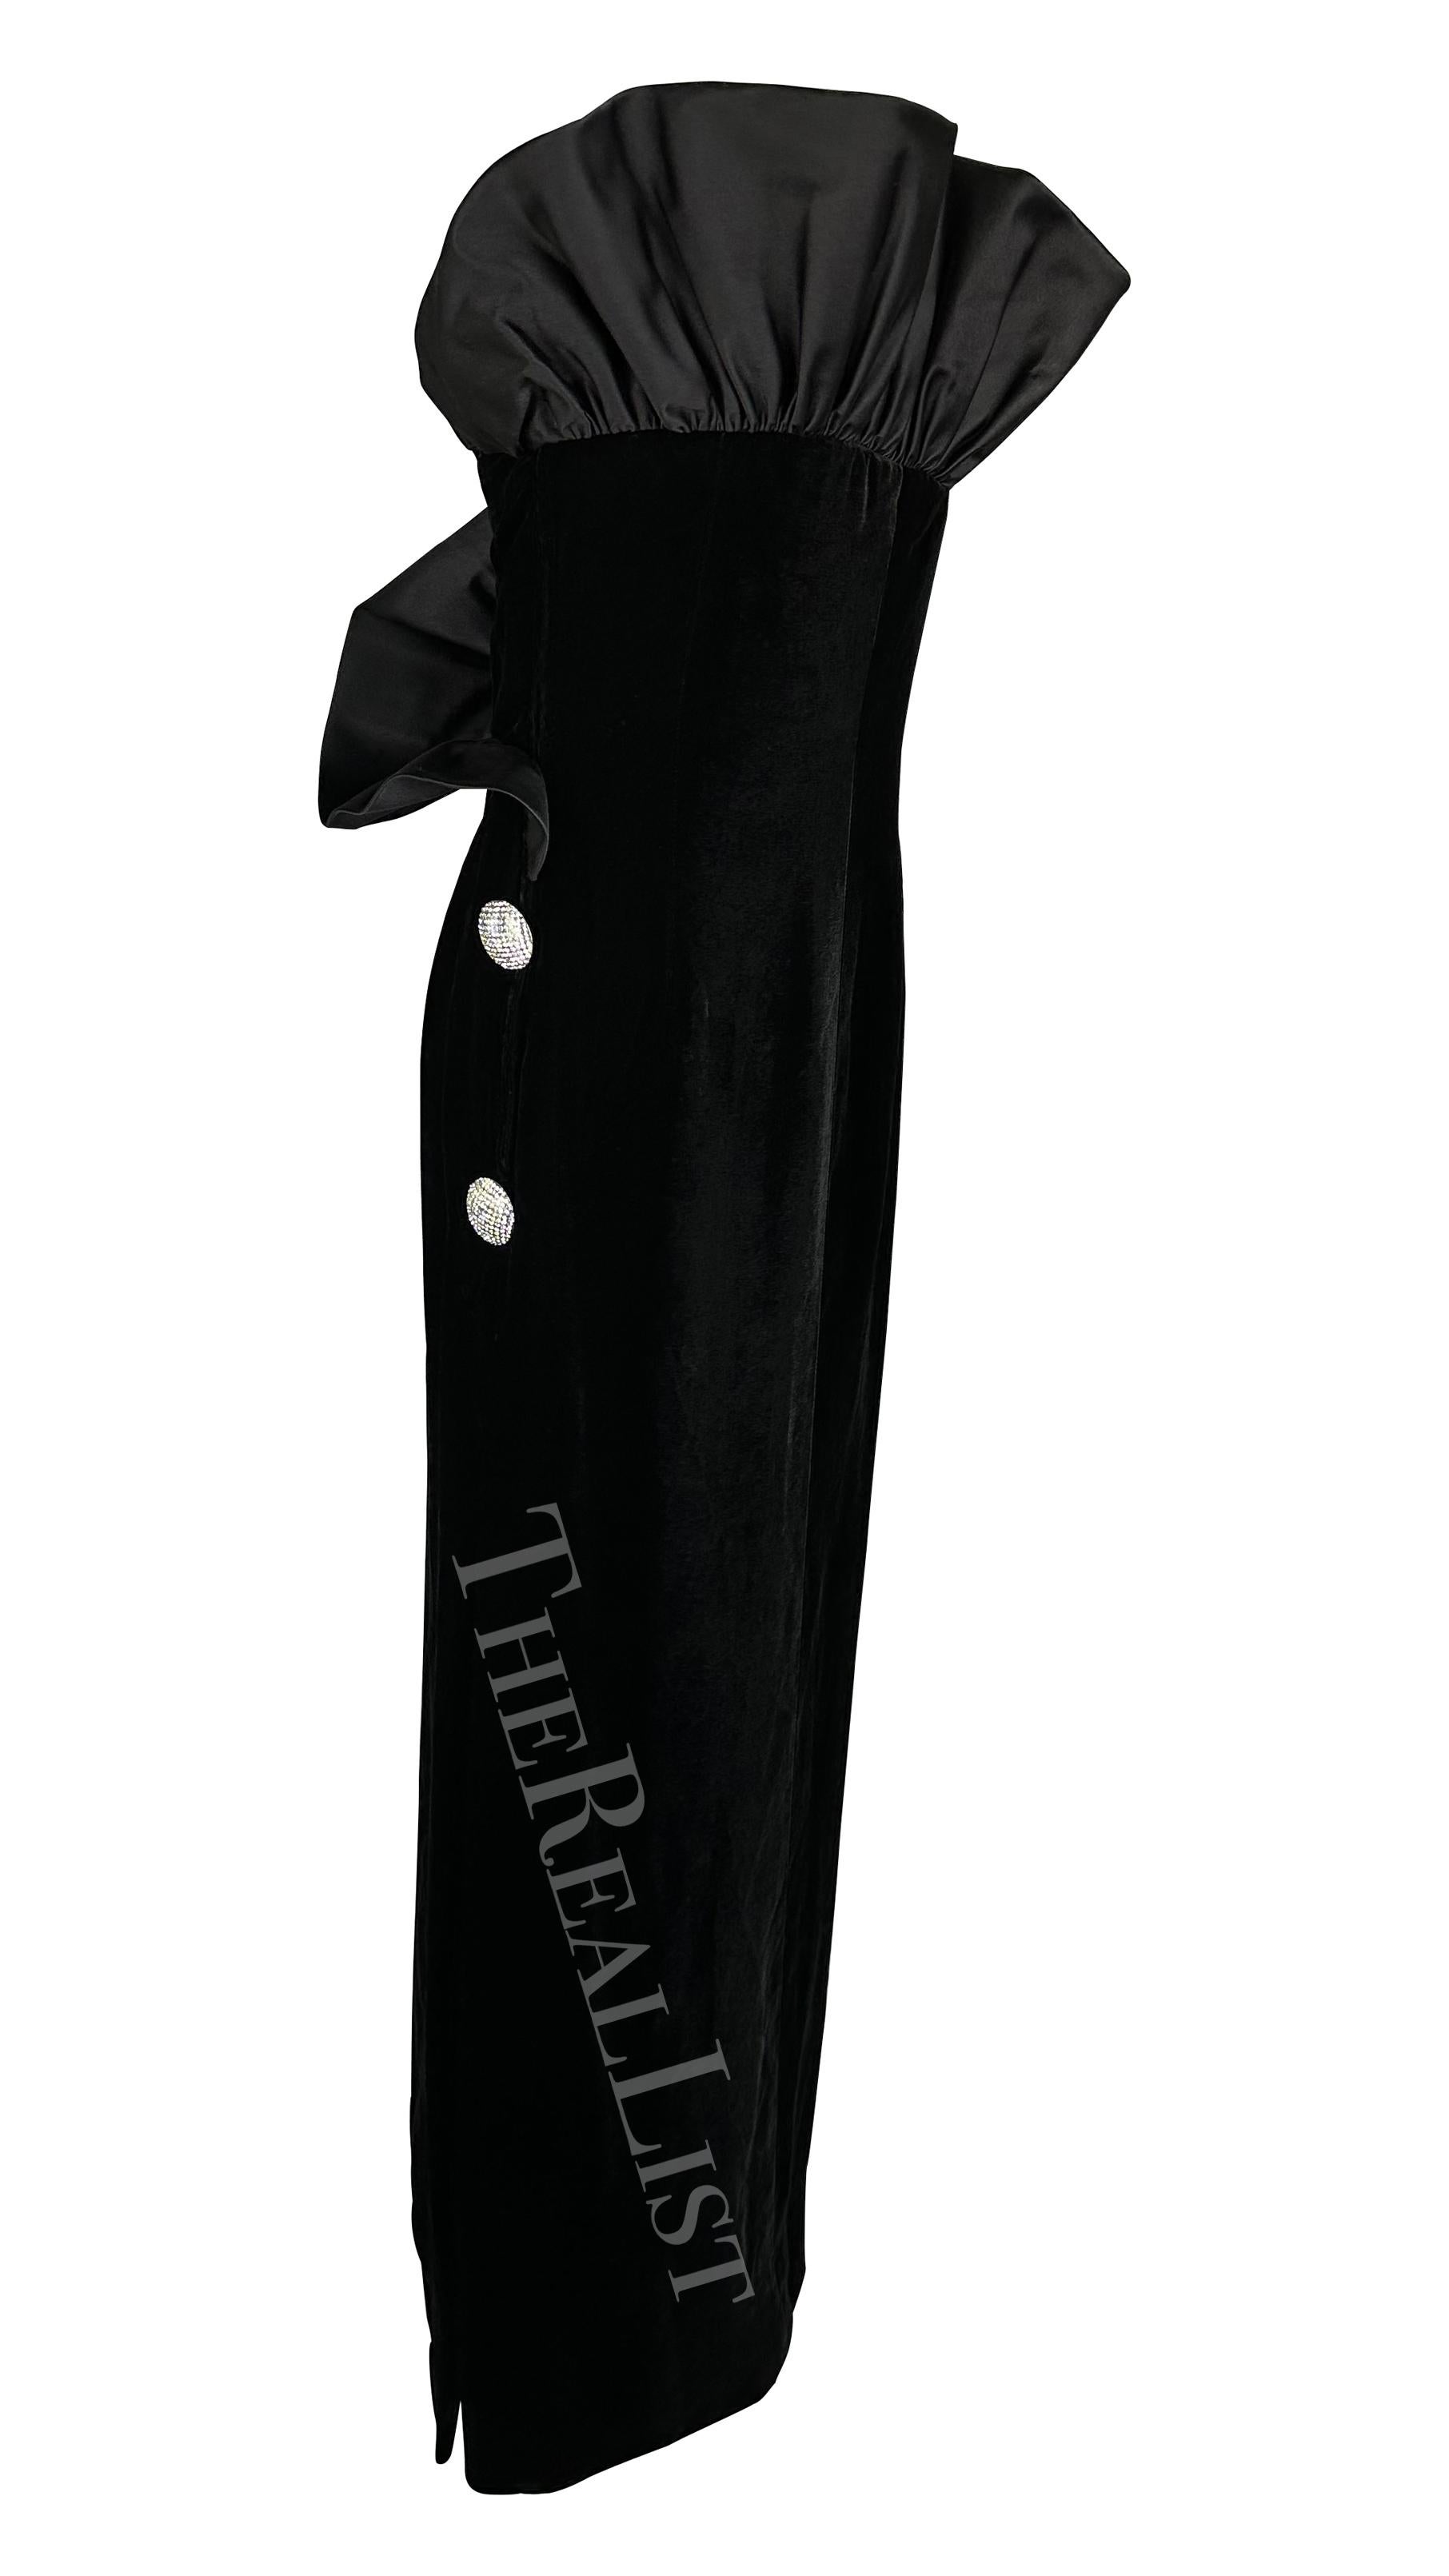 F/W 1987 Givenchy Black Velvet Sculptural Rhinestone Strapless Gown In Excellent Condition For Sale In West Hollywood, CA